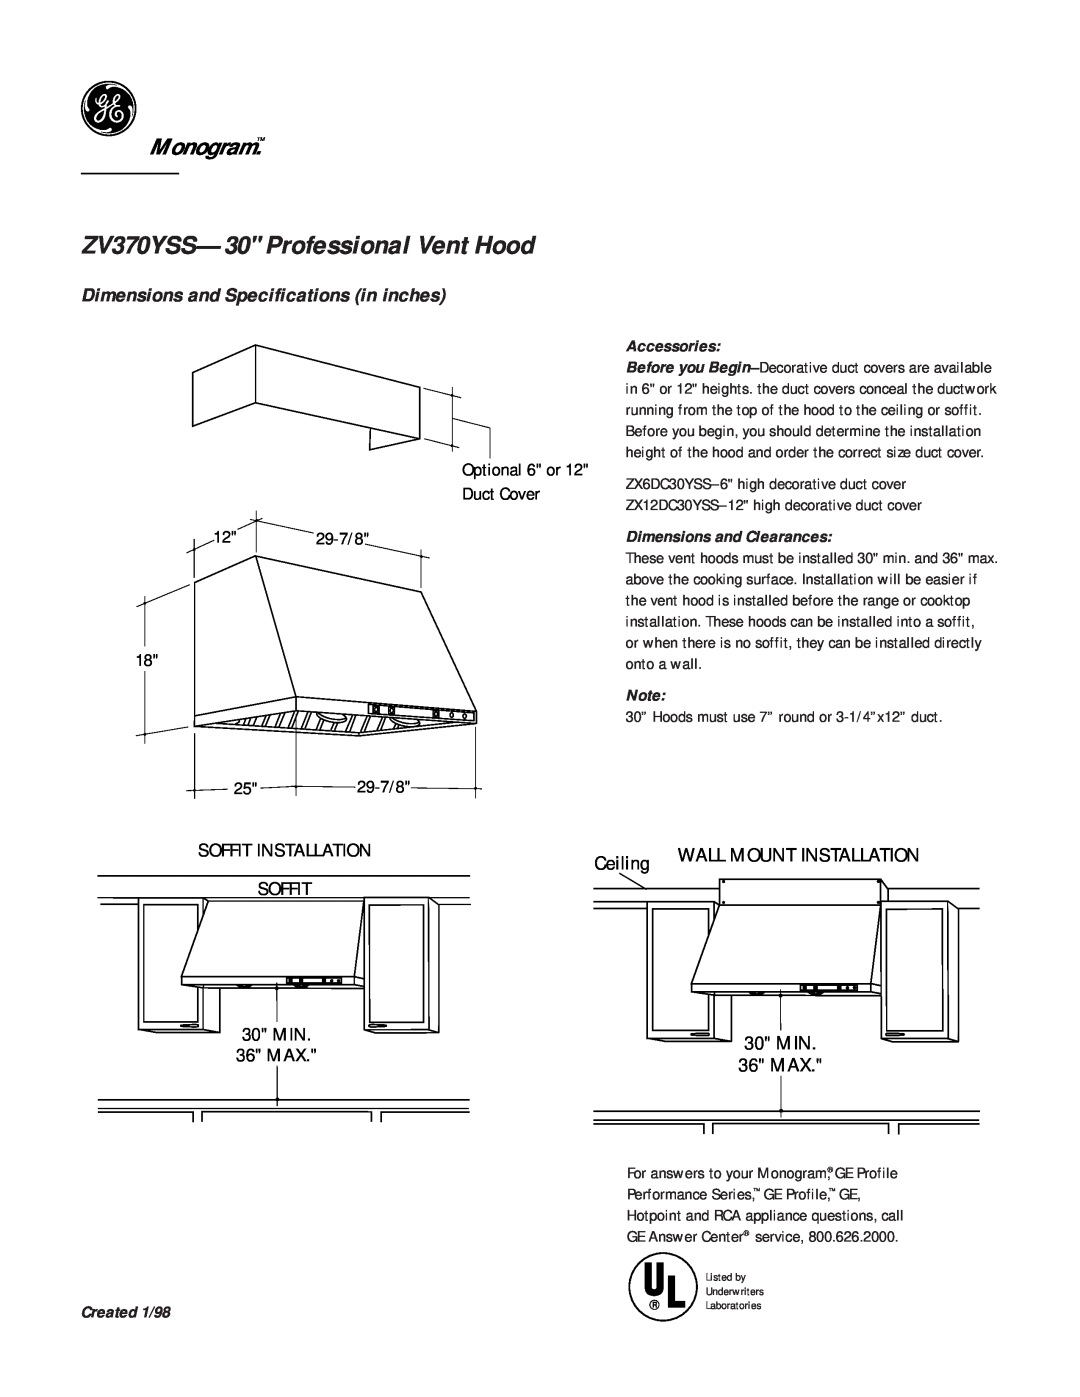 GE ZV370YSS--30 dimensions ZV370YSS-30 Professional Vent Hood, Monogram, Ceiling, Dimensions and Specifications in inches 